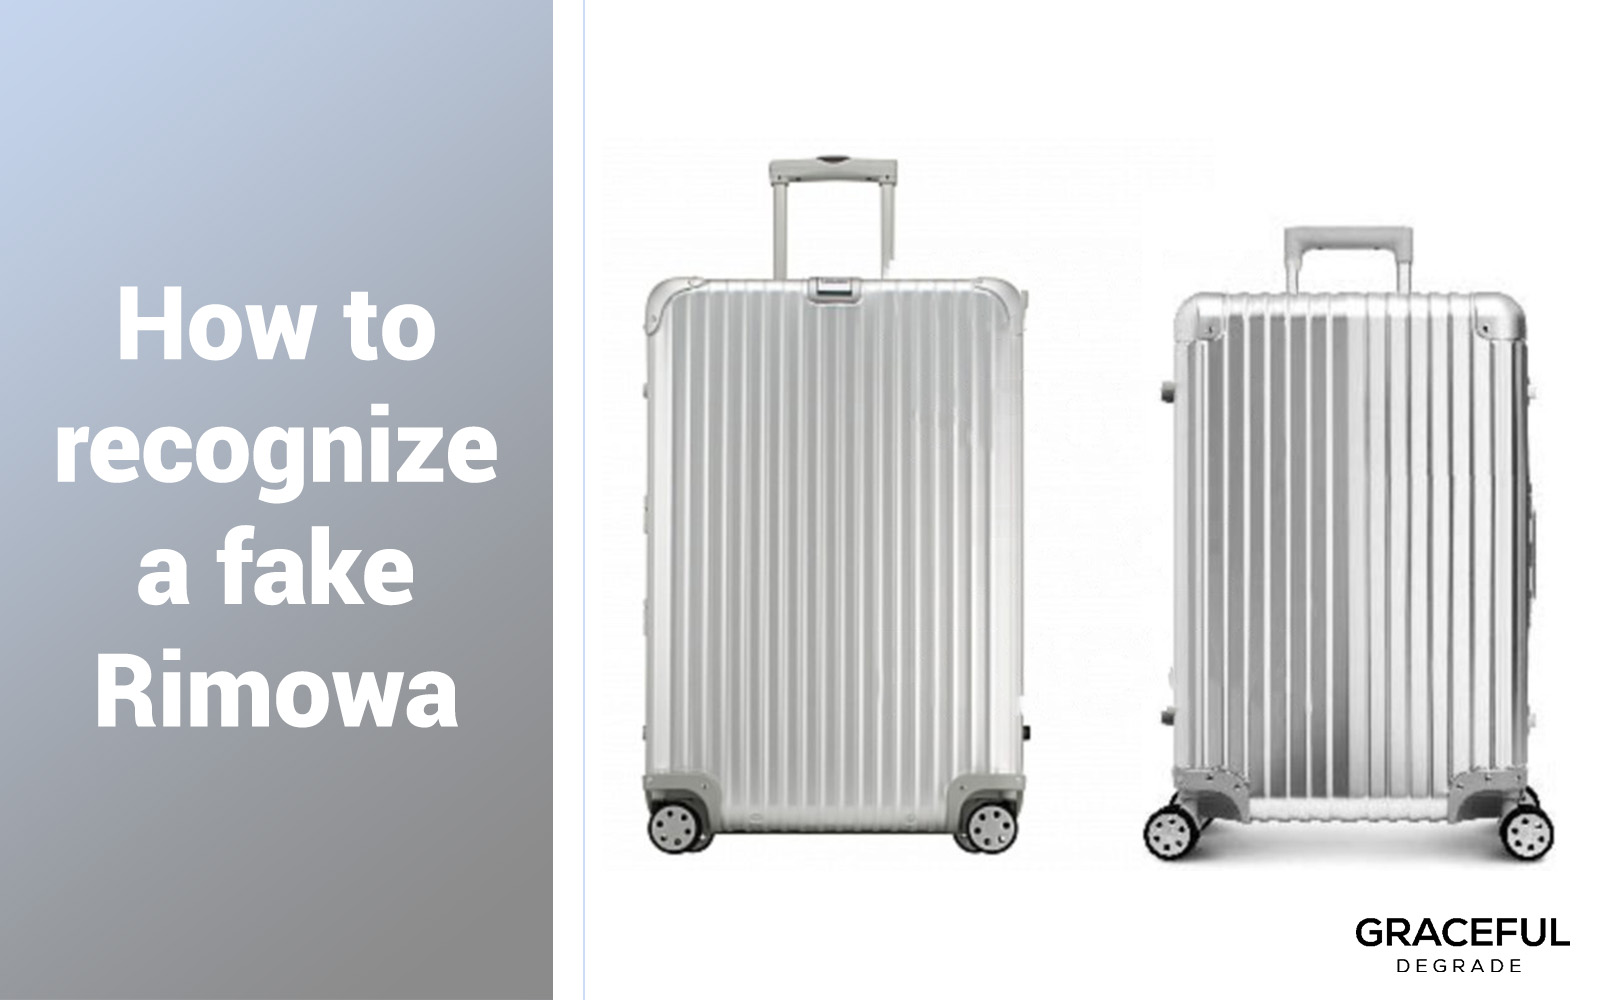 How to recognize a fake Rimowa | Gracefuldegrade